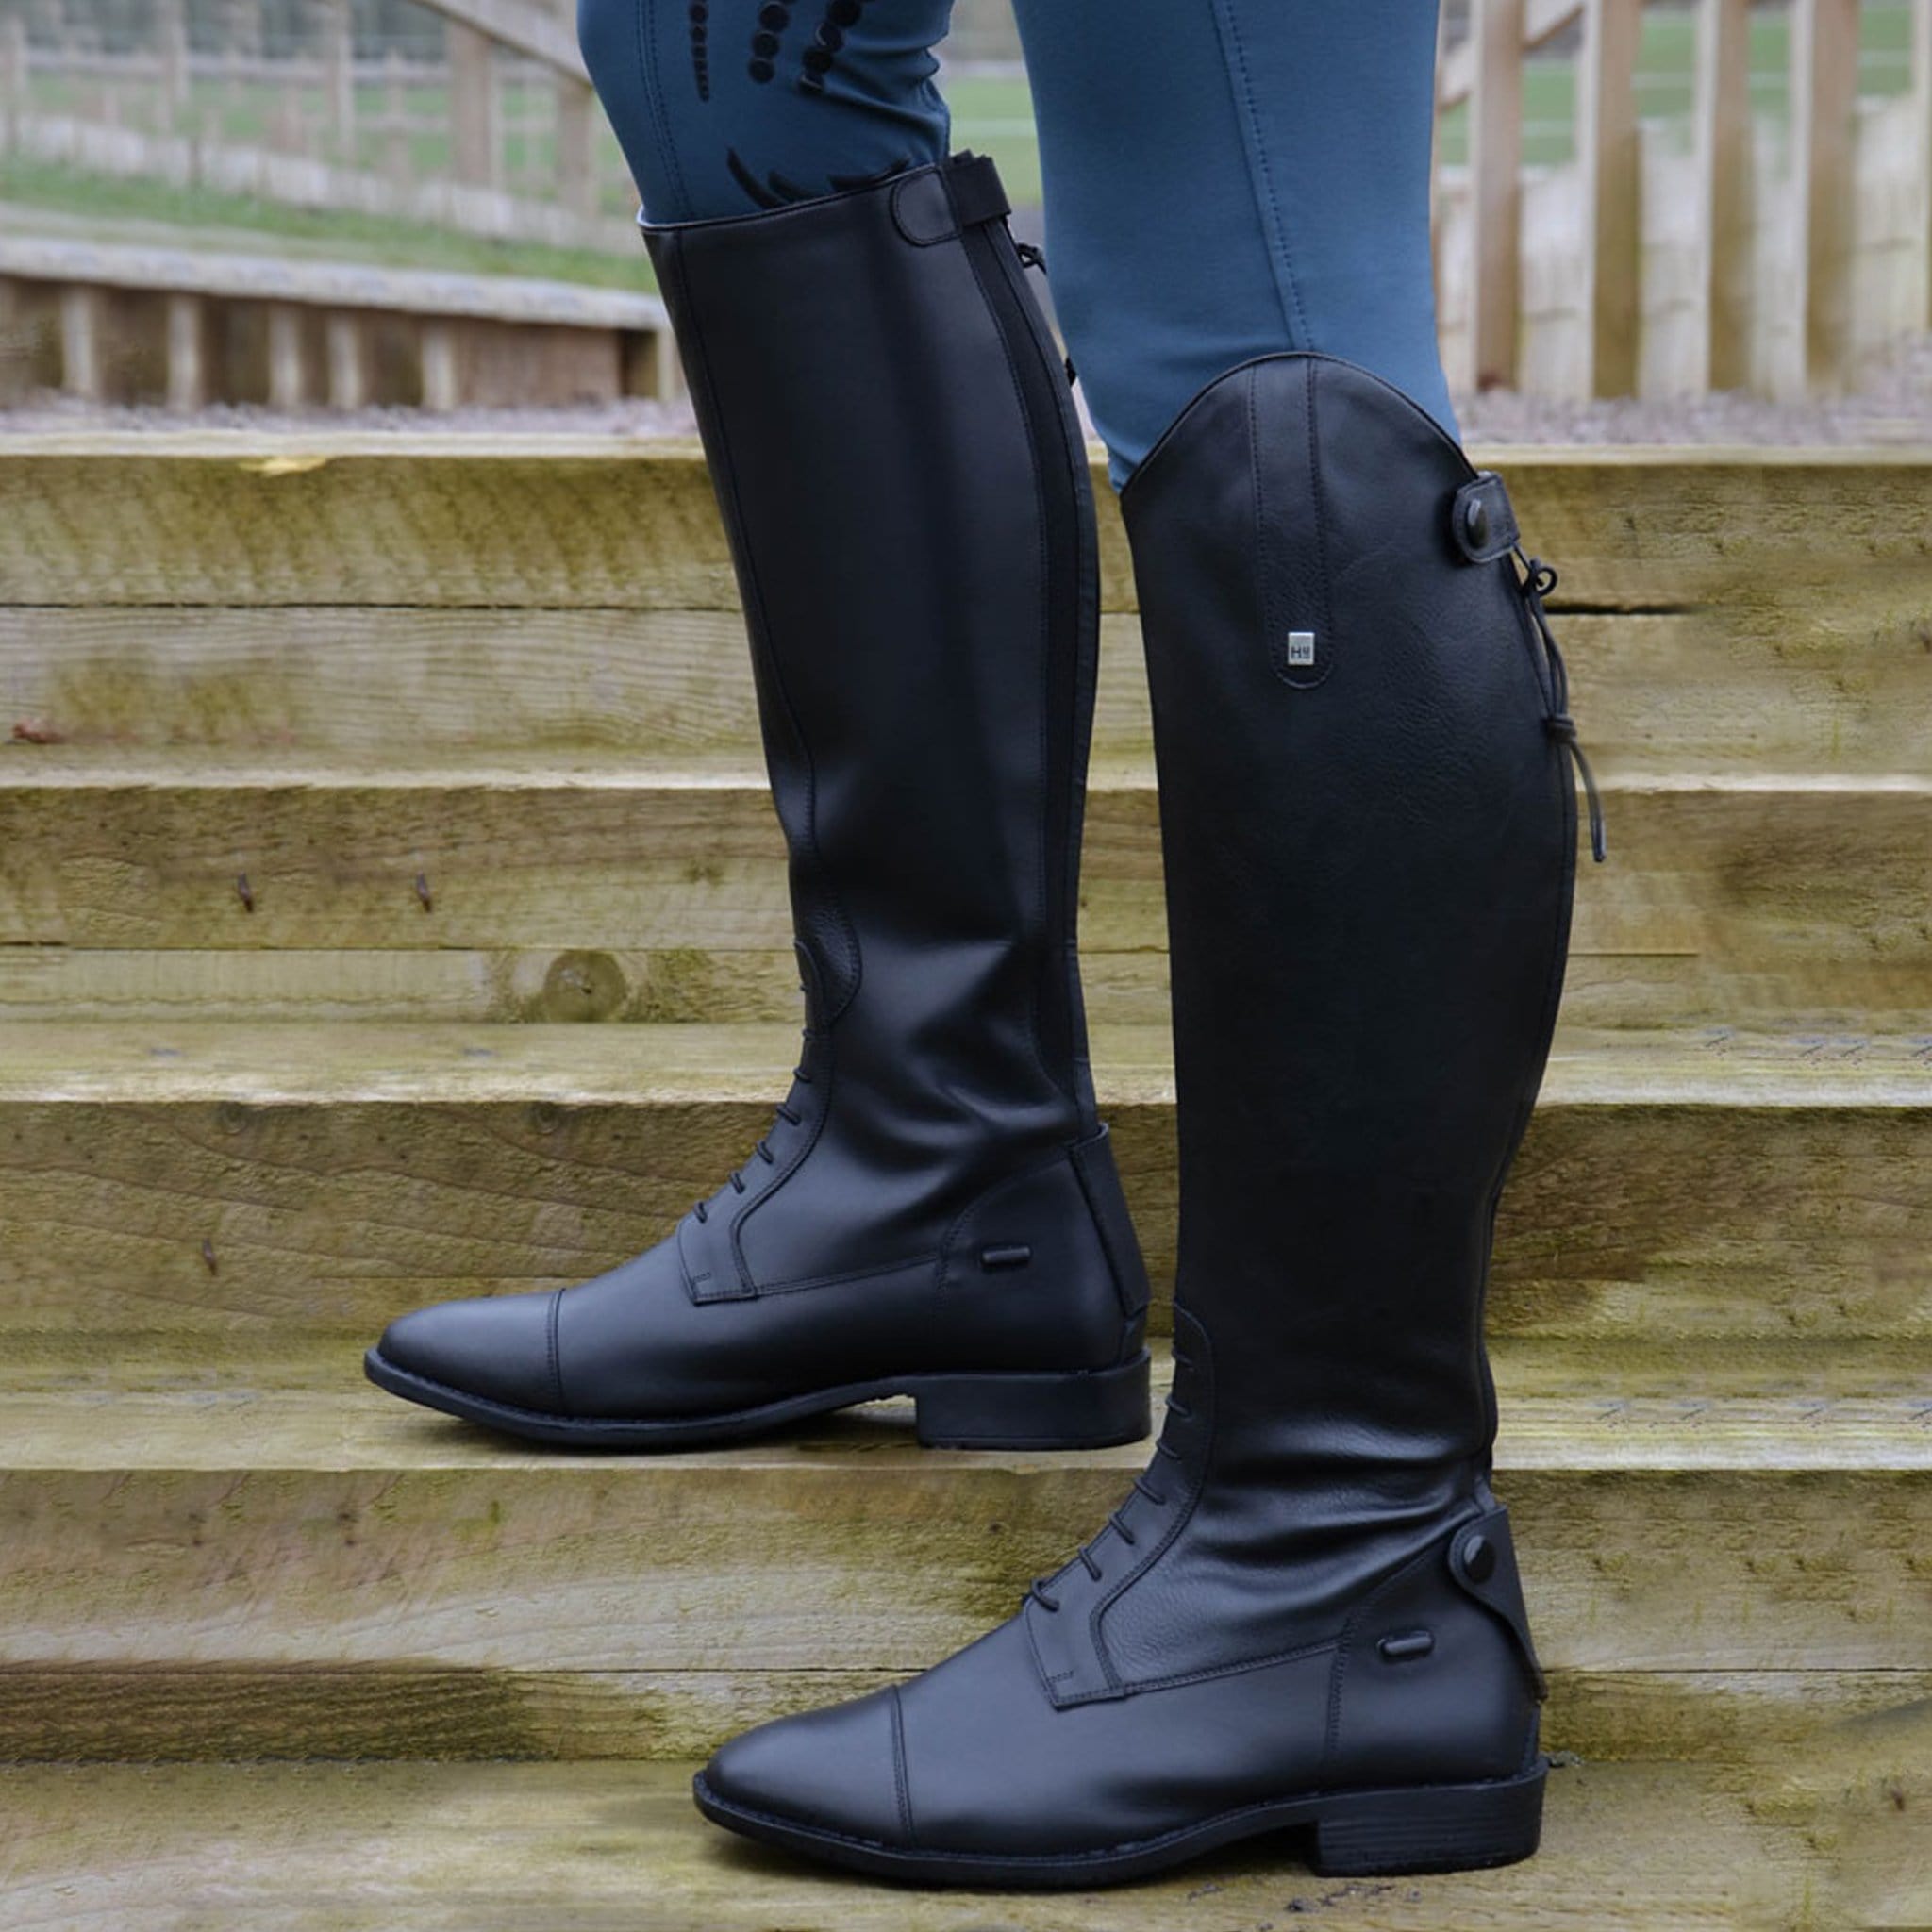 HyLAND Sorrento Field Riding Boots 14115